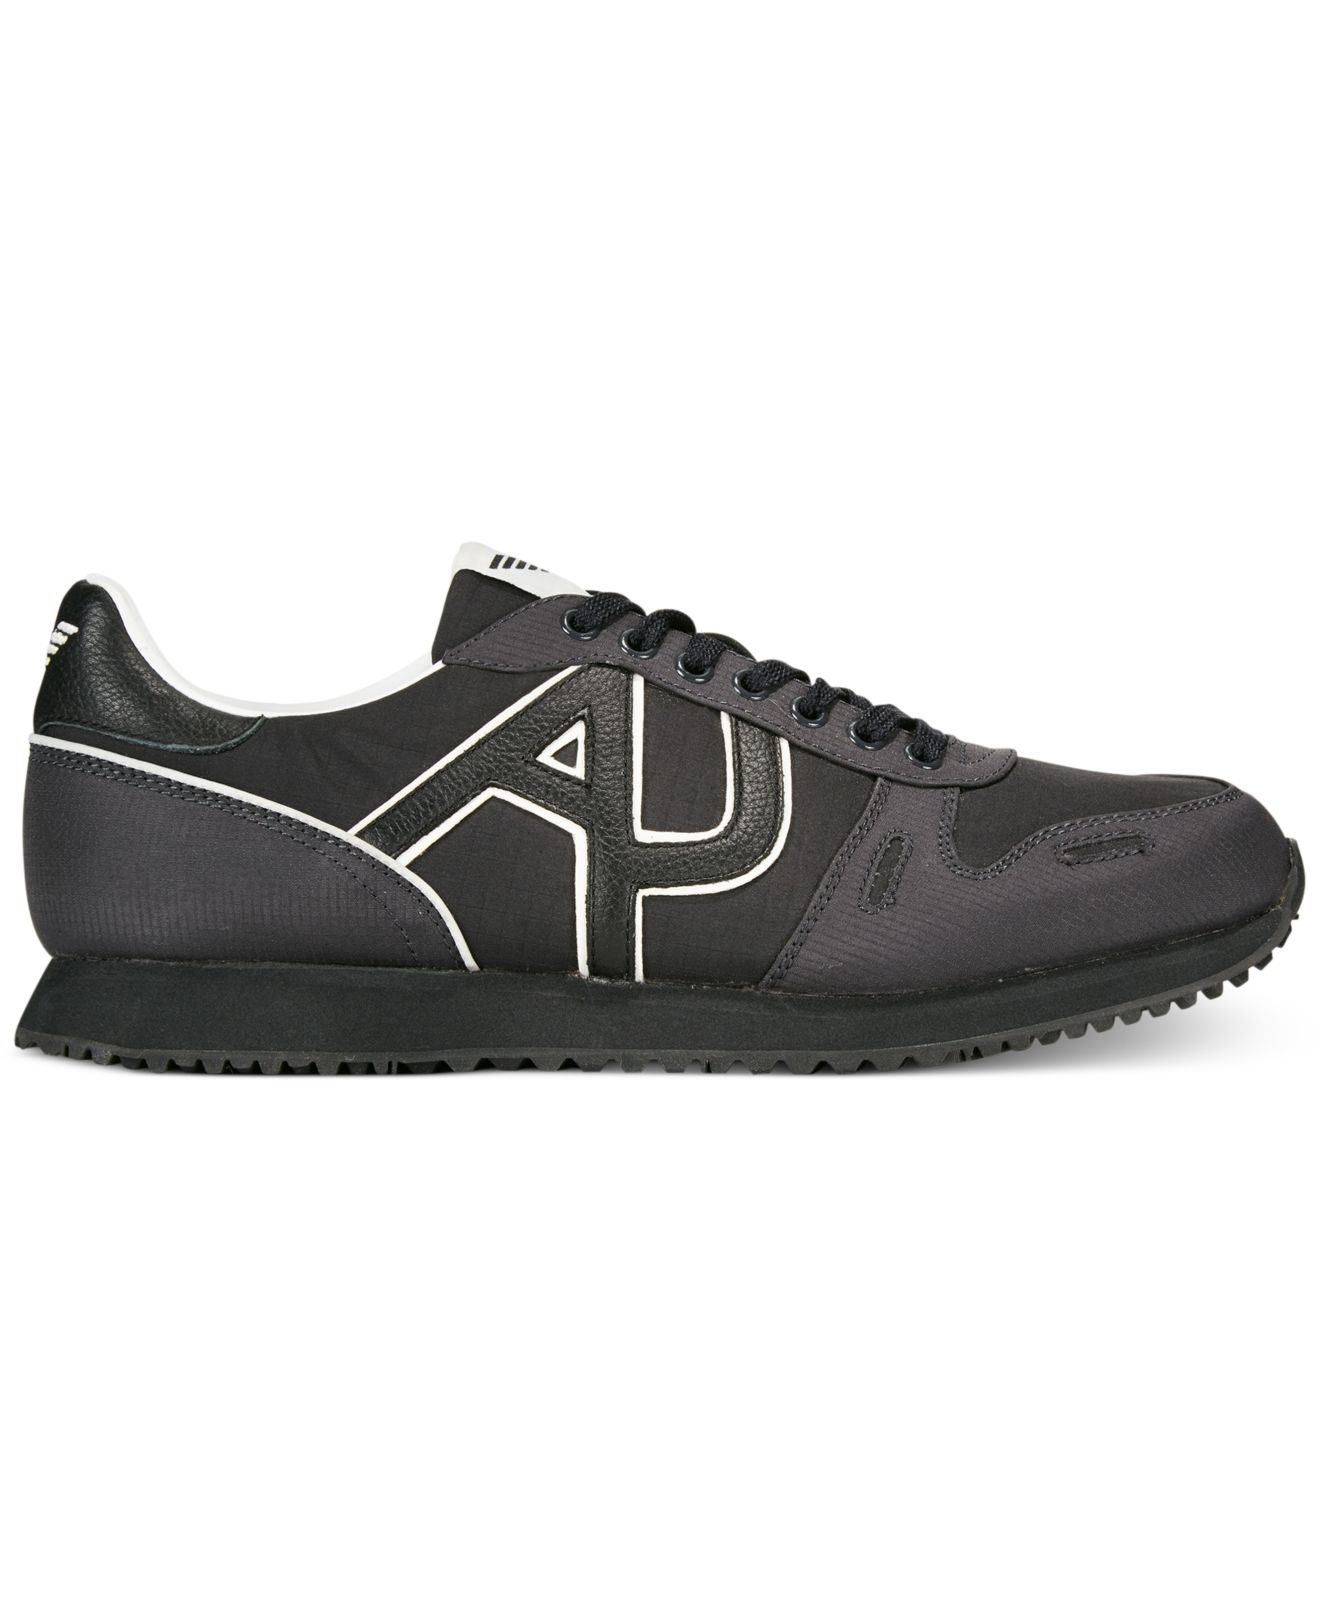 Lyst - Armani Jeans Trainer Sneakers in Black for Men